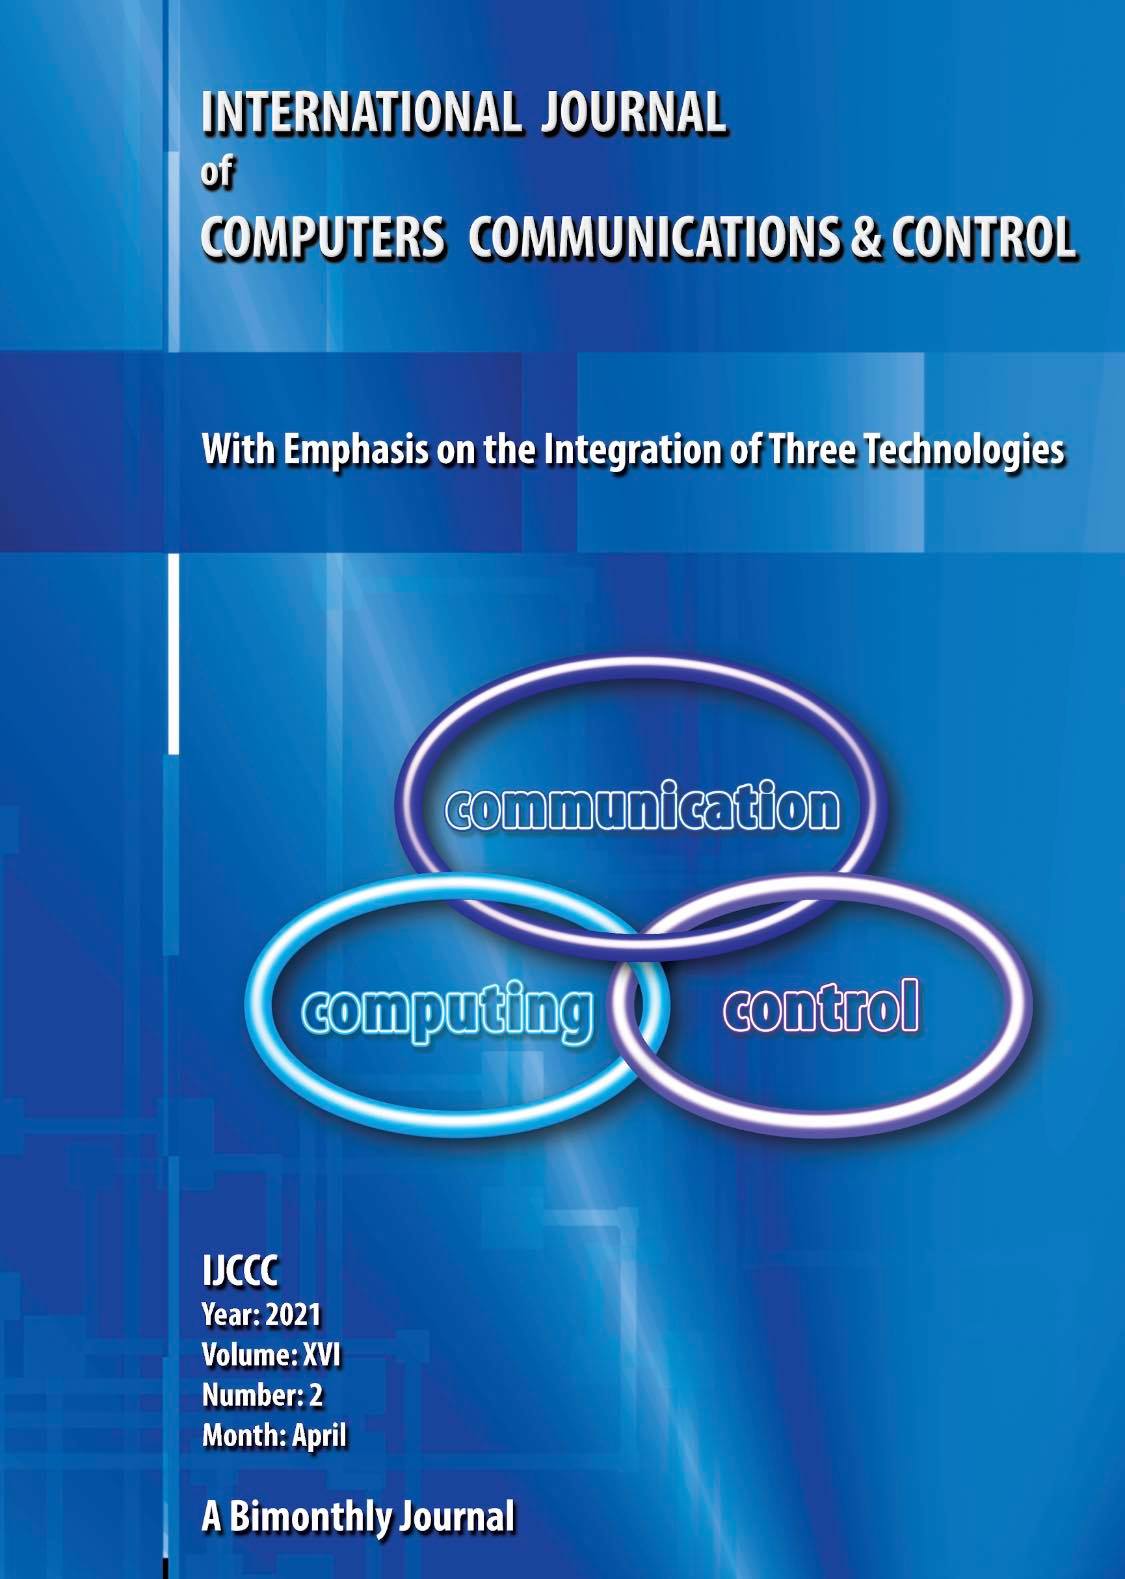 					View Vol. 16 No. 2 (2021): International Journal of Computers Communications & Control (April)
				